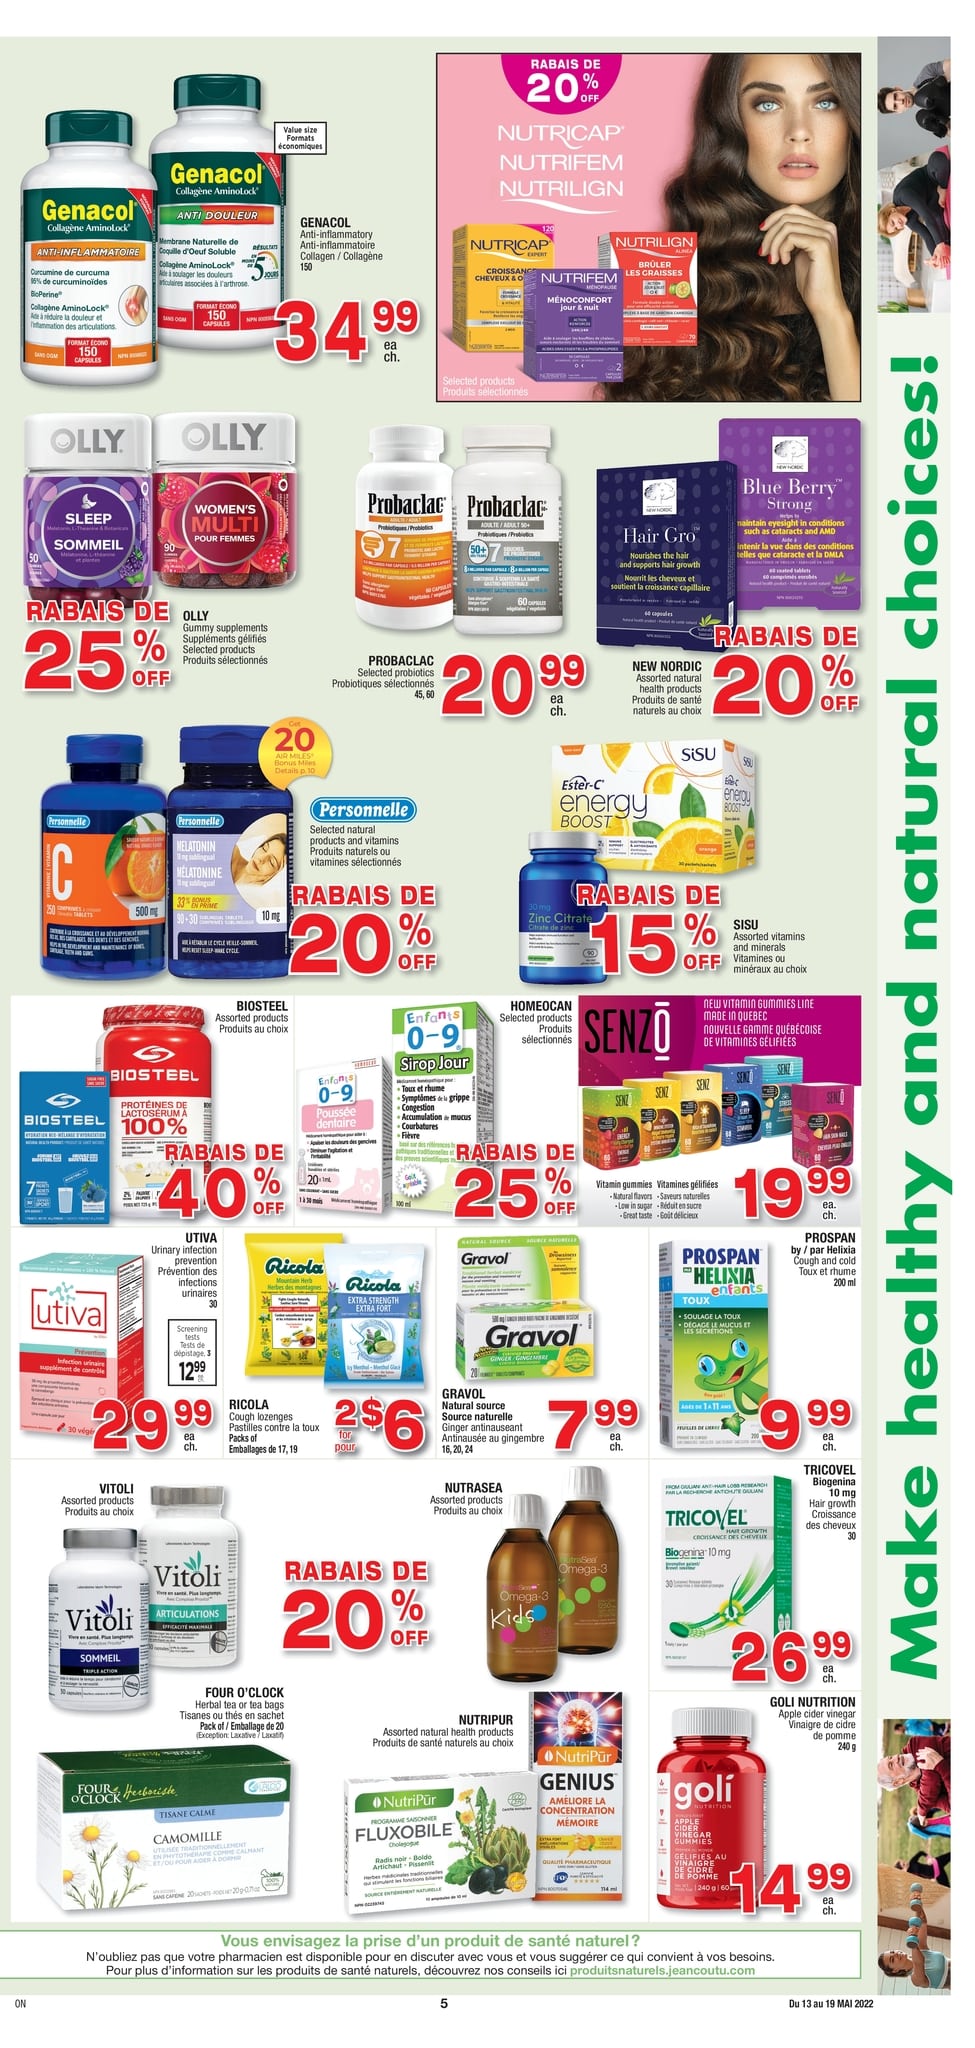 Jean Coutu - Weekly Flyer Specials - Page 5